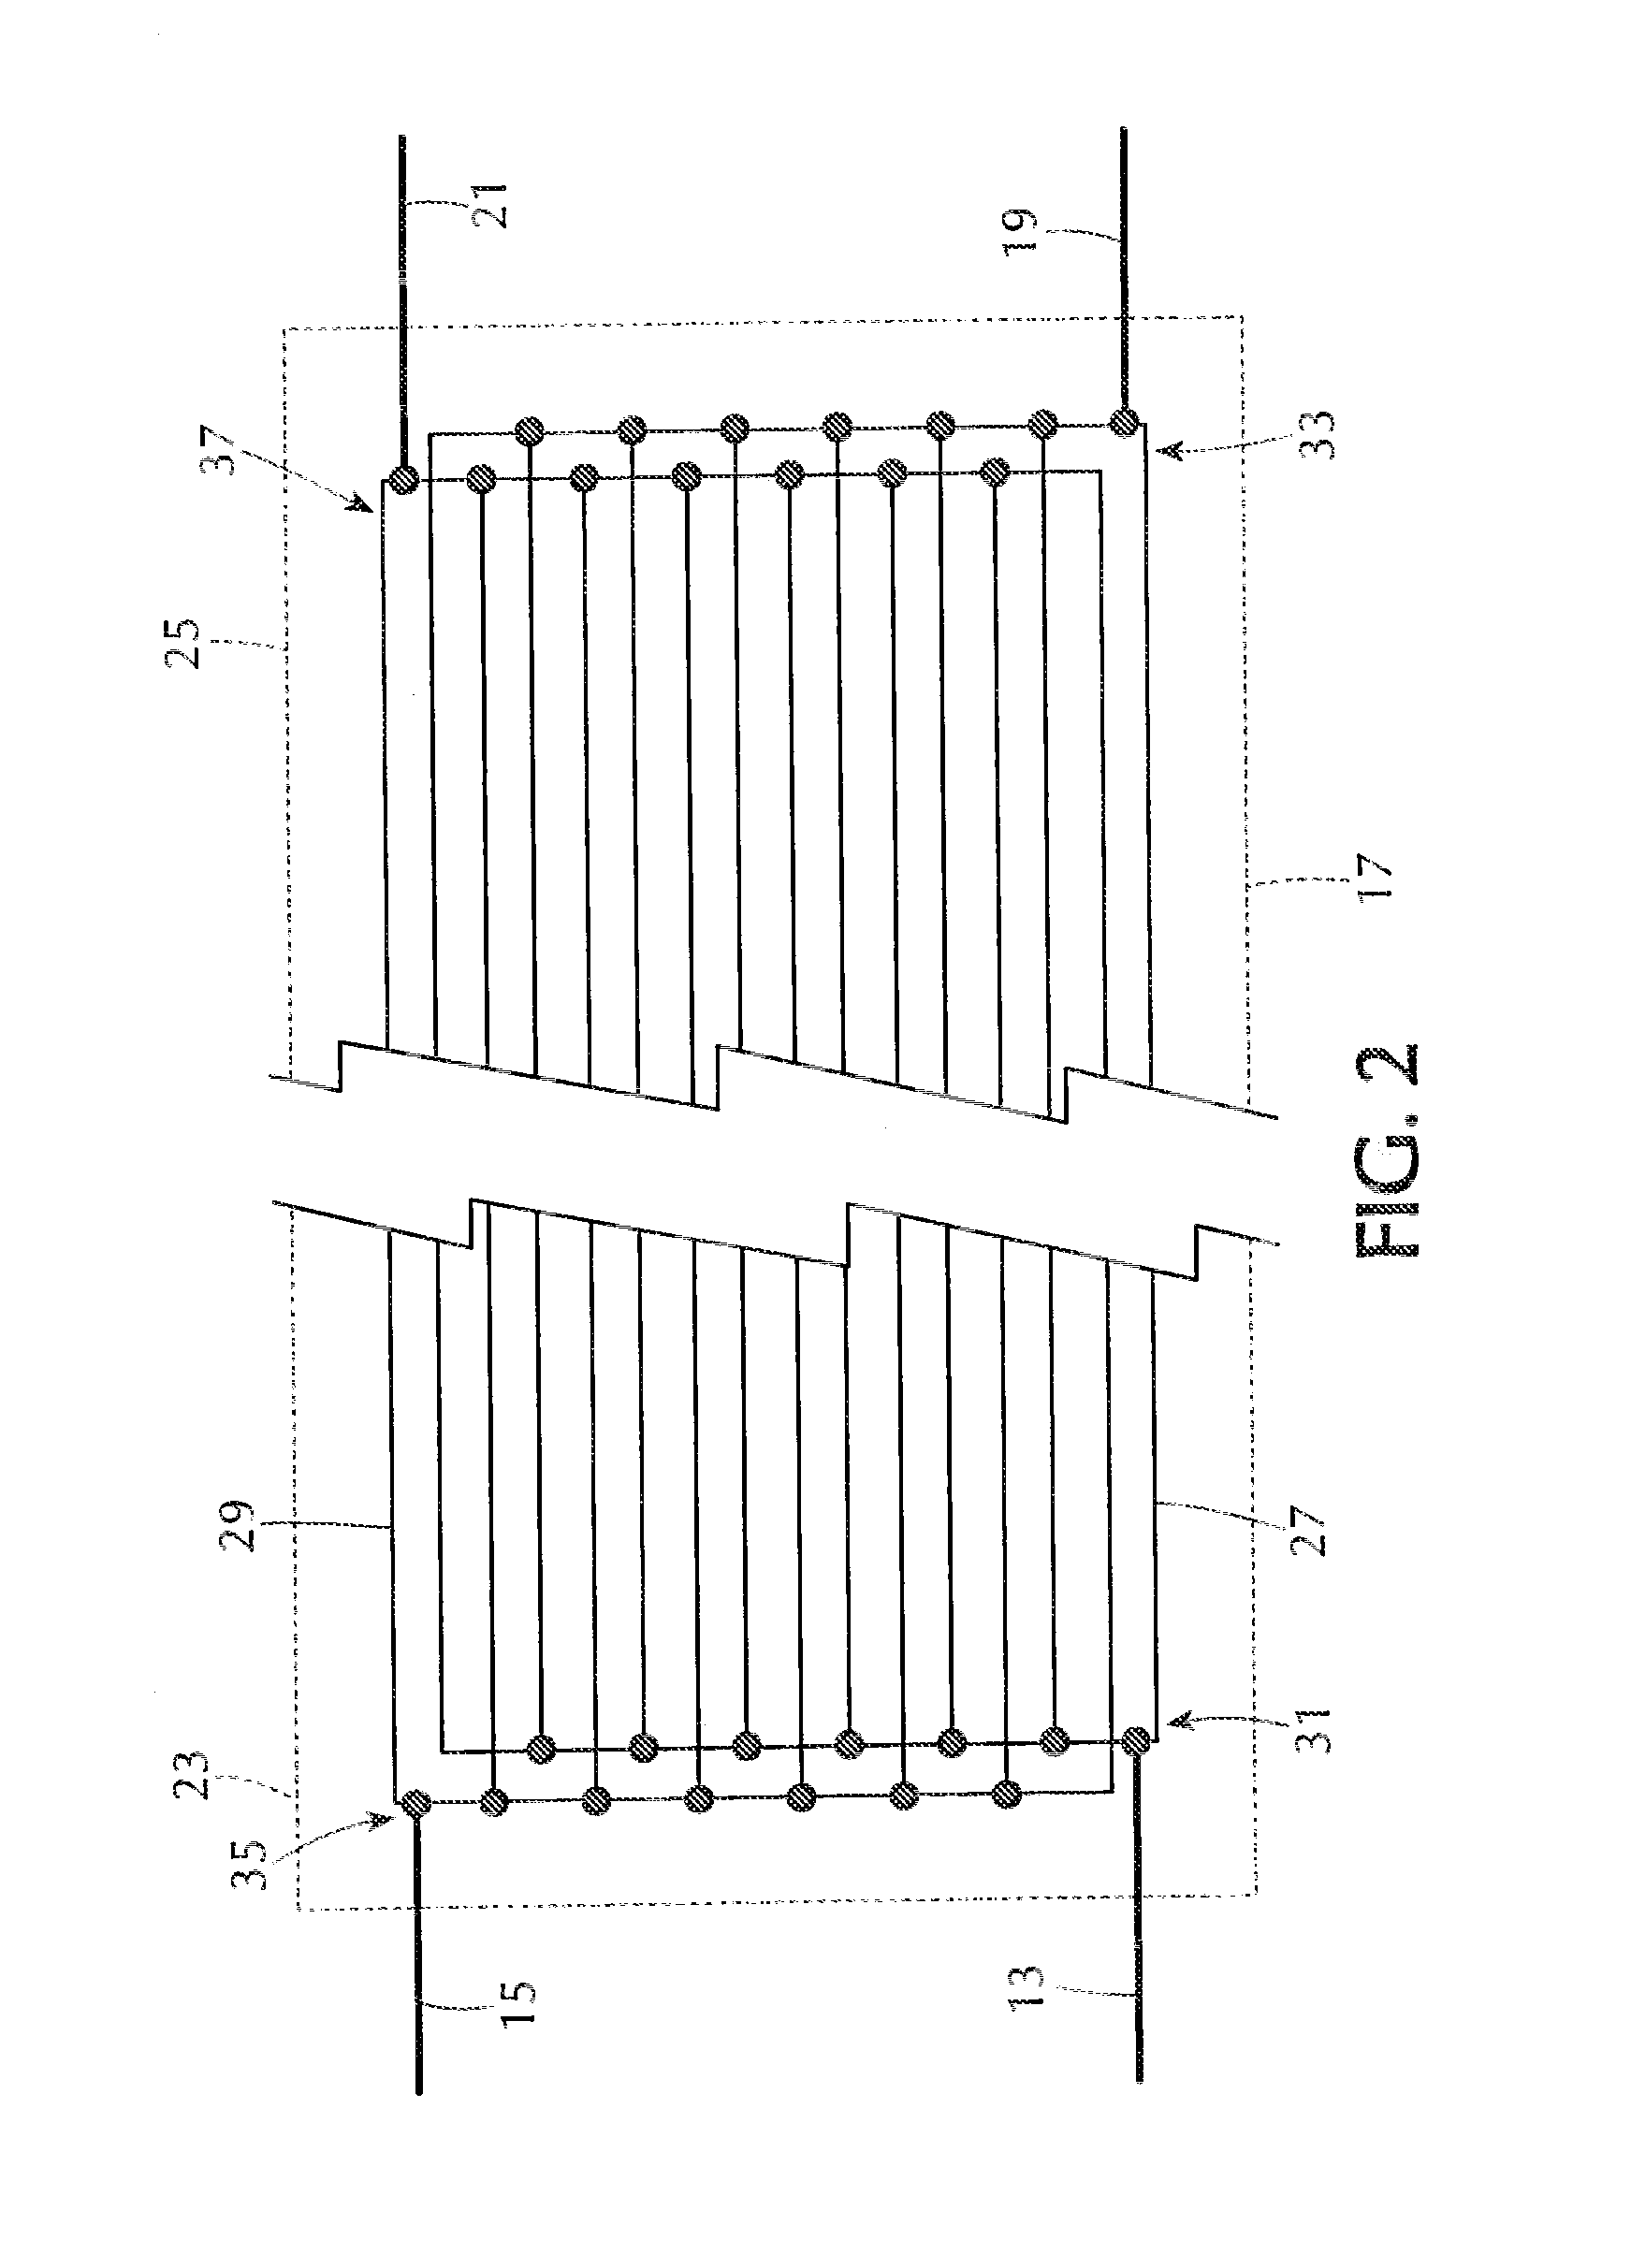 Electrical power transmission system and method